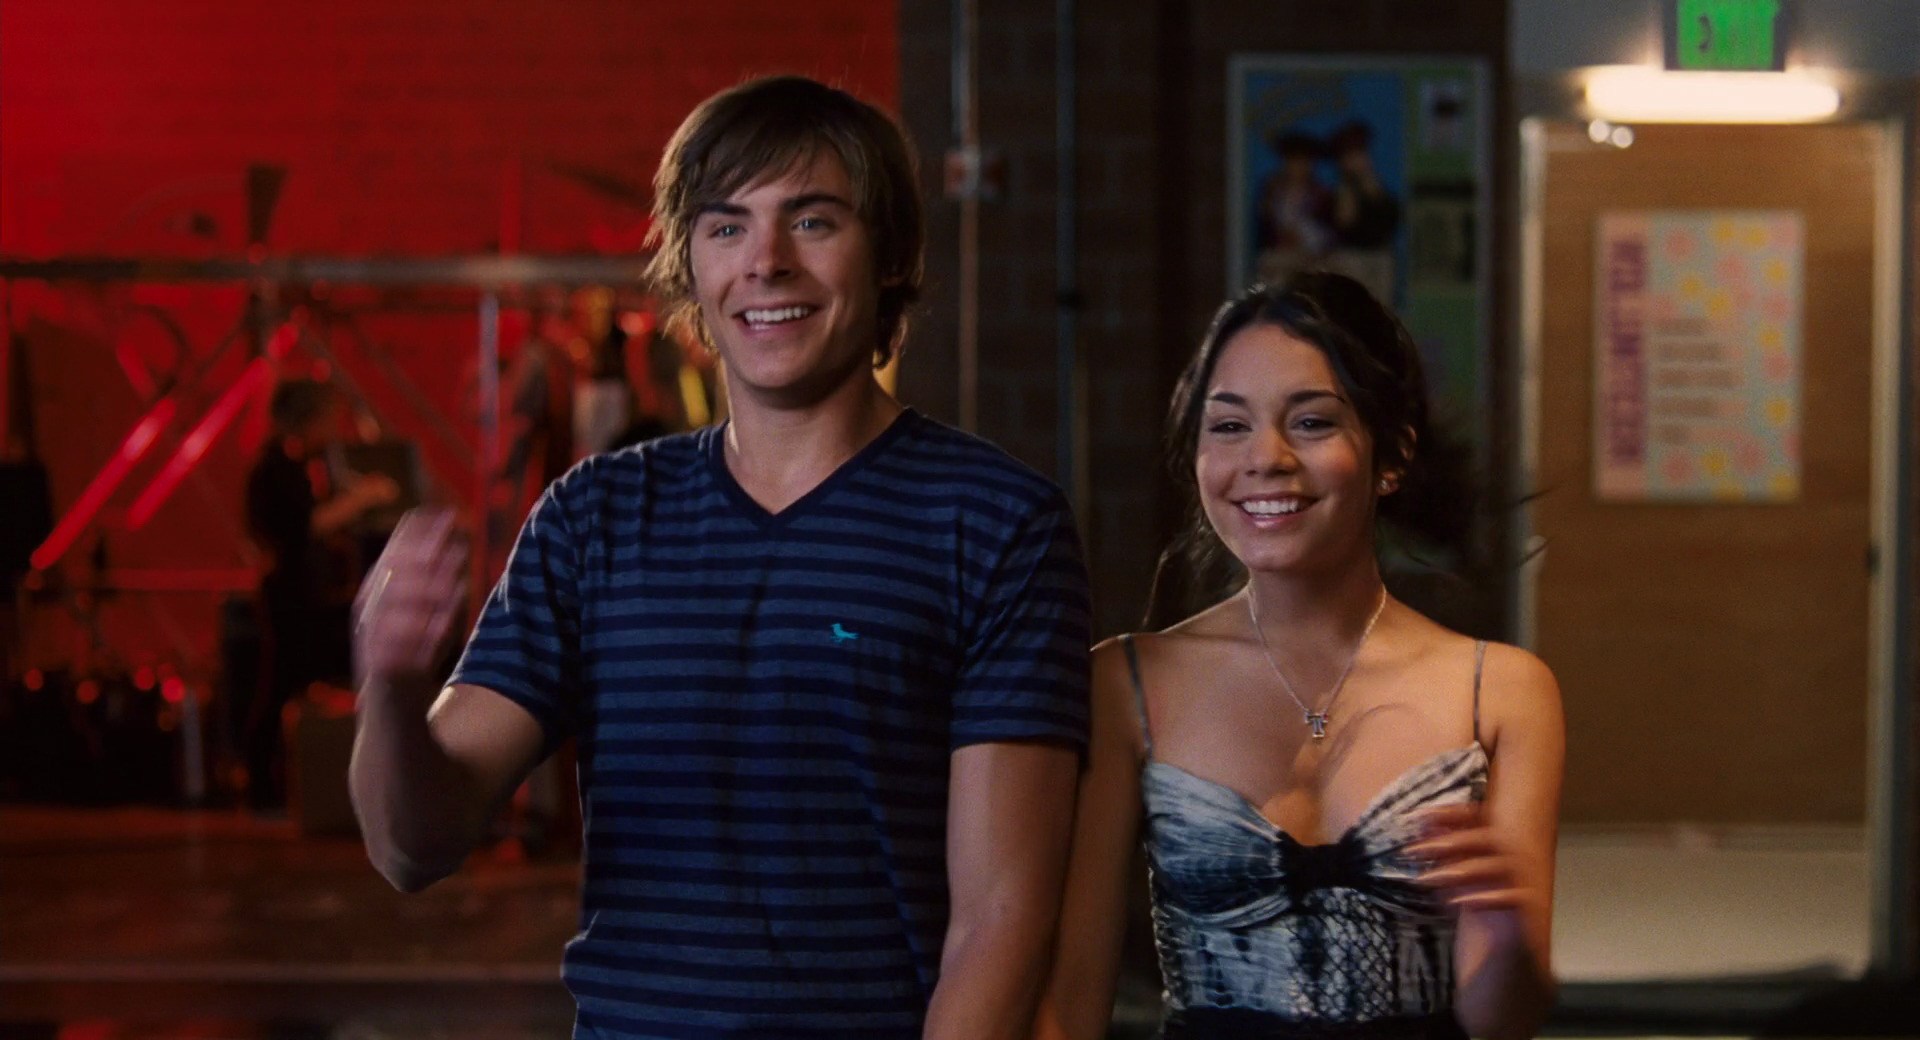 The 'High School Musical' Cast: Where Are They Now?